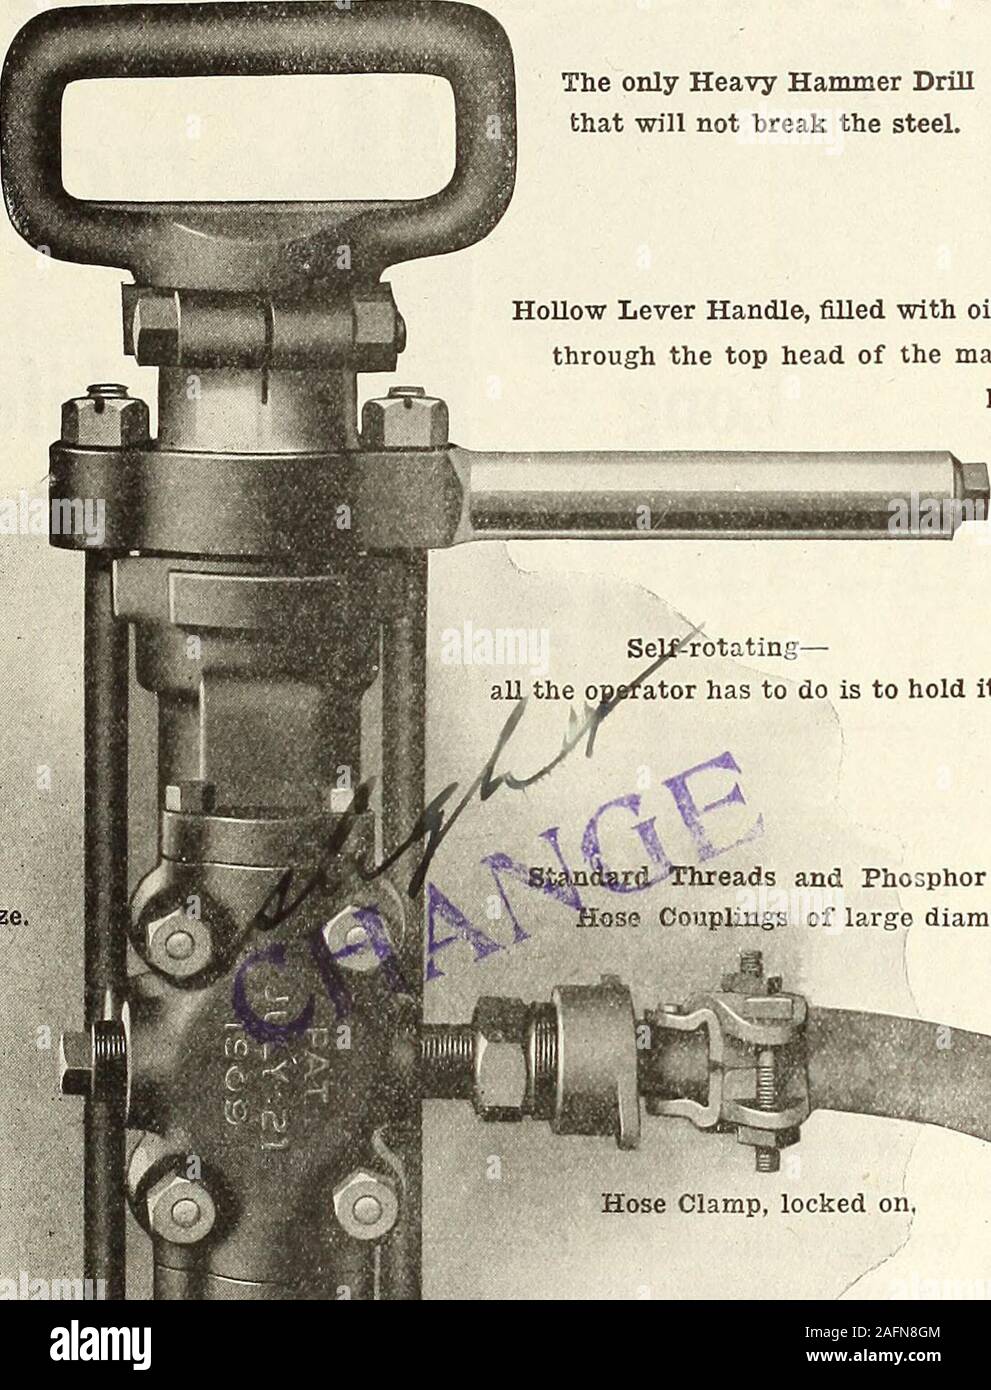 . Canadian transportation & distribution management. July, 1913.] CANADIAN RAILWAY AND MARINE WORLD. 5 McKiernan-T prrv Self RotatingCity Hammer Drill Removable Handle, so thattelescope feed may be attachedwhen using drill for stoping. A Valve that will NOT freeze Sel^rotating—all the ona^ator has to do is to hold it. Threads and Pho3phor Bronze:ose Couplings of large diameter. Extra Heavy Side Kod. The only Heavy Hammer Drillthat will not break the steel. Hollow Lever Handle, filled with oil, fed by pressurethrough the top head of the machine, thoroughly lubricating everymovable part. Hose Cl Stock Photo